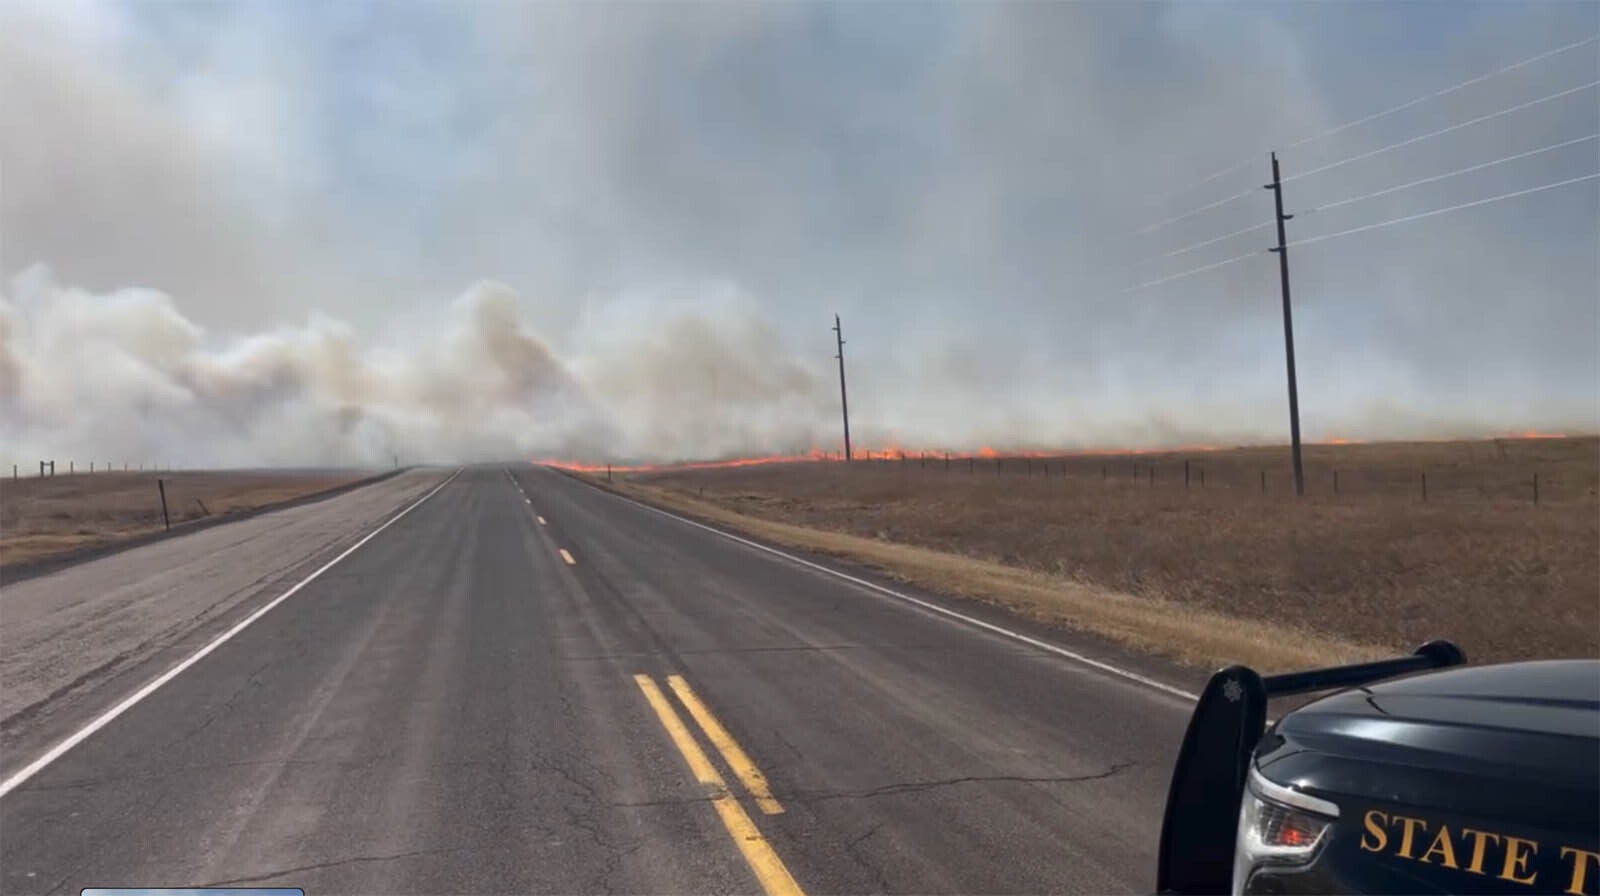 Flames from a fast-moving grass fire jumped Interstate 80 just west of Cheyenne on Saturday, driven by winds gusting more than 65 mph.